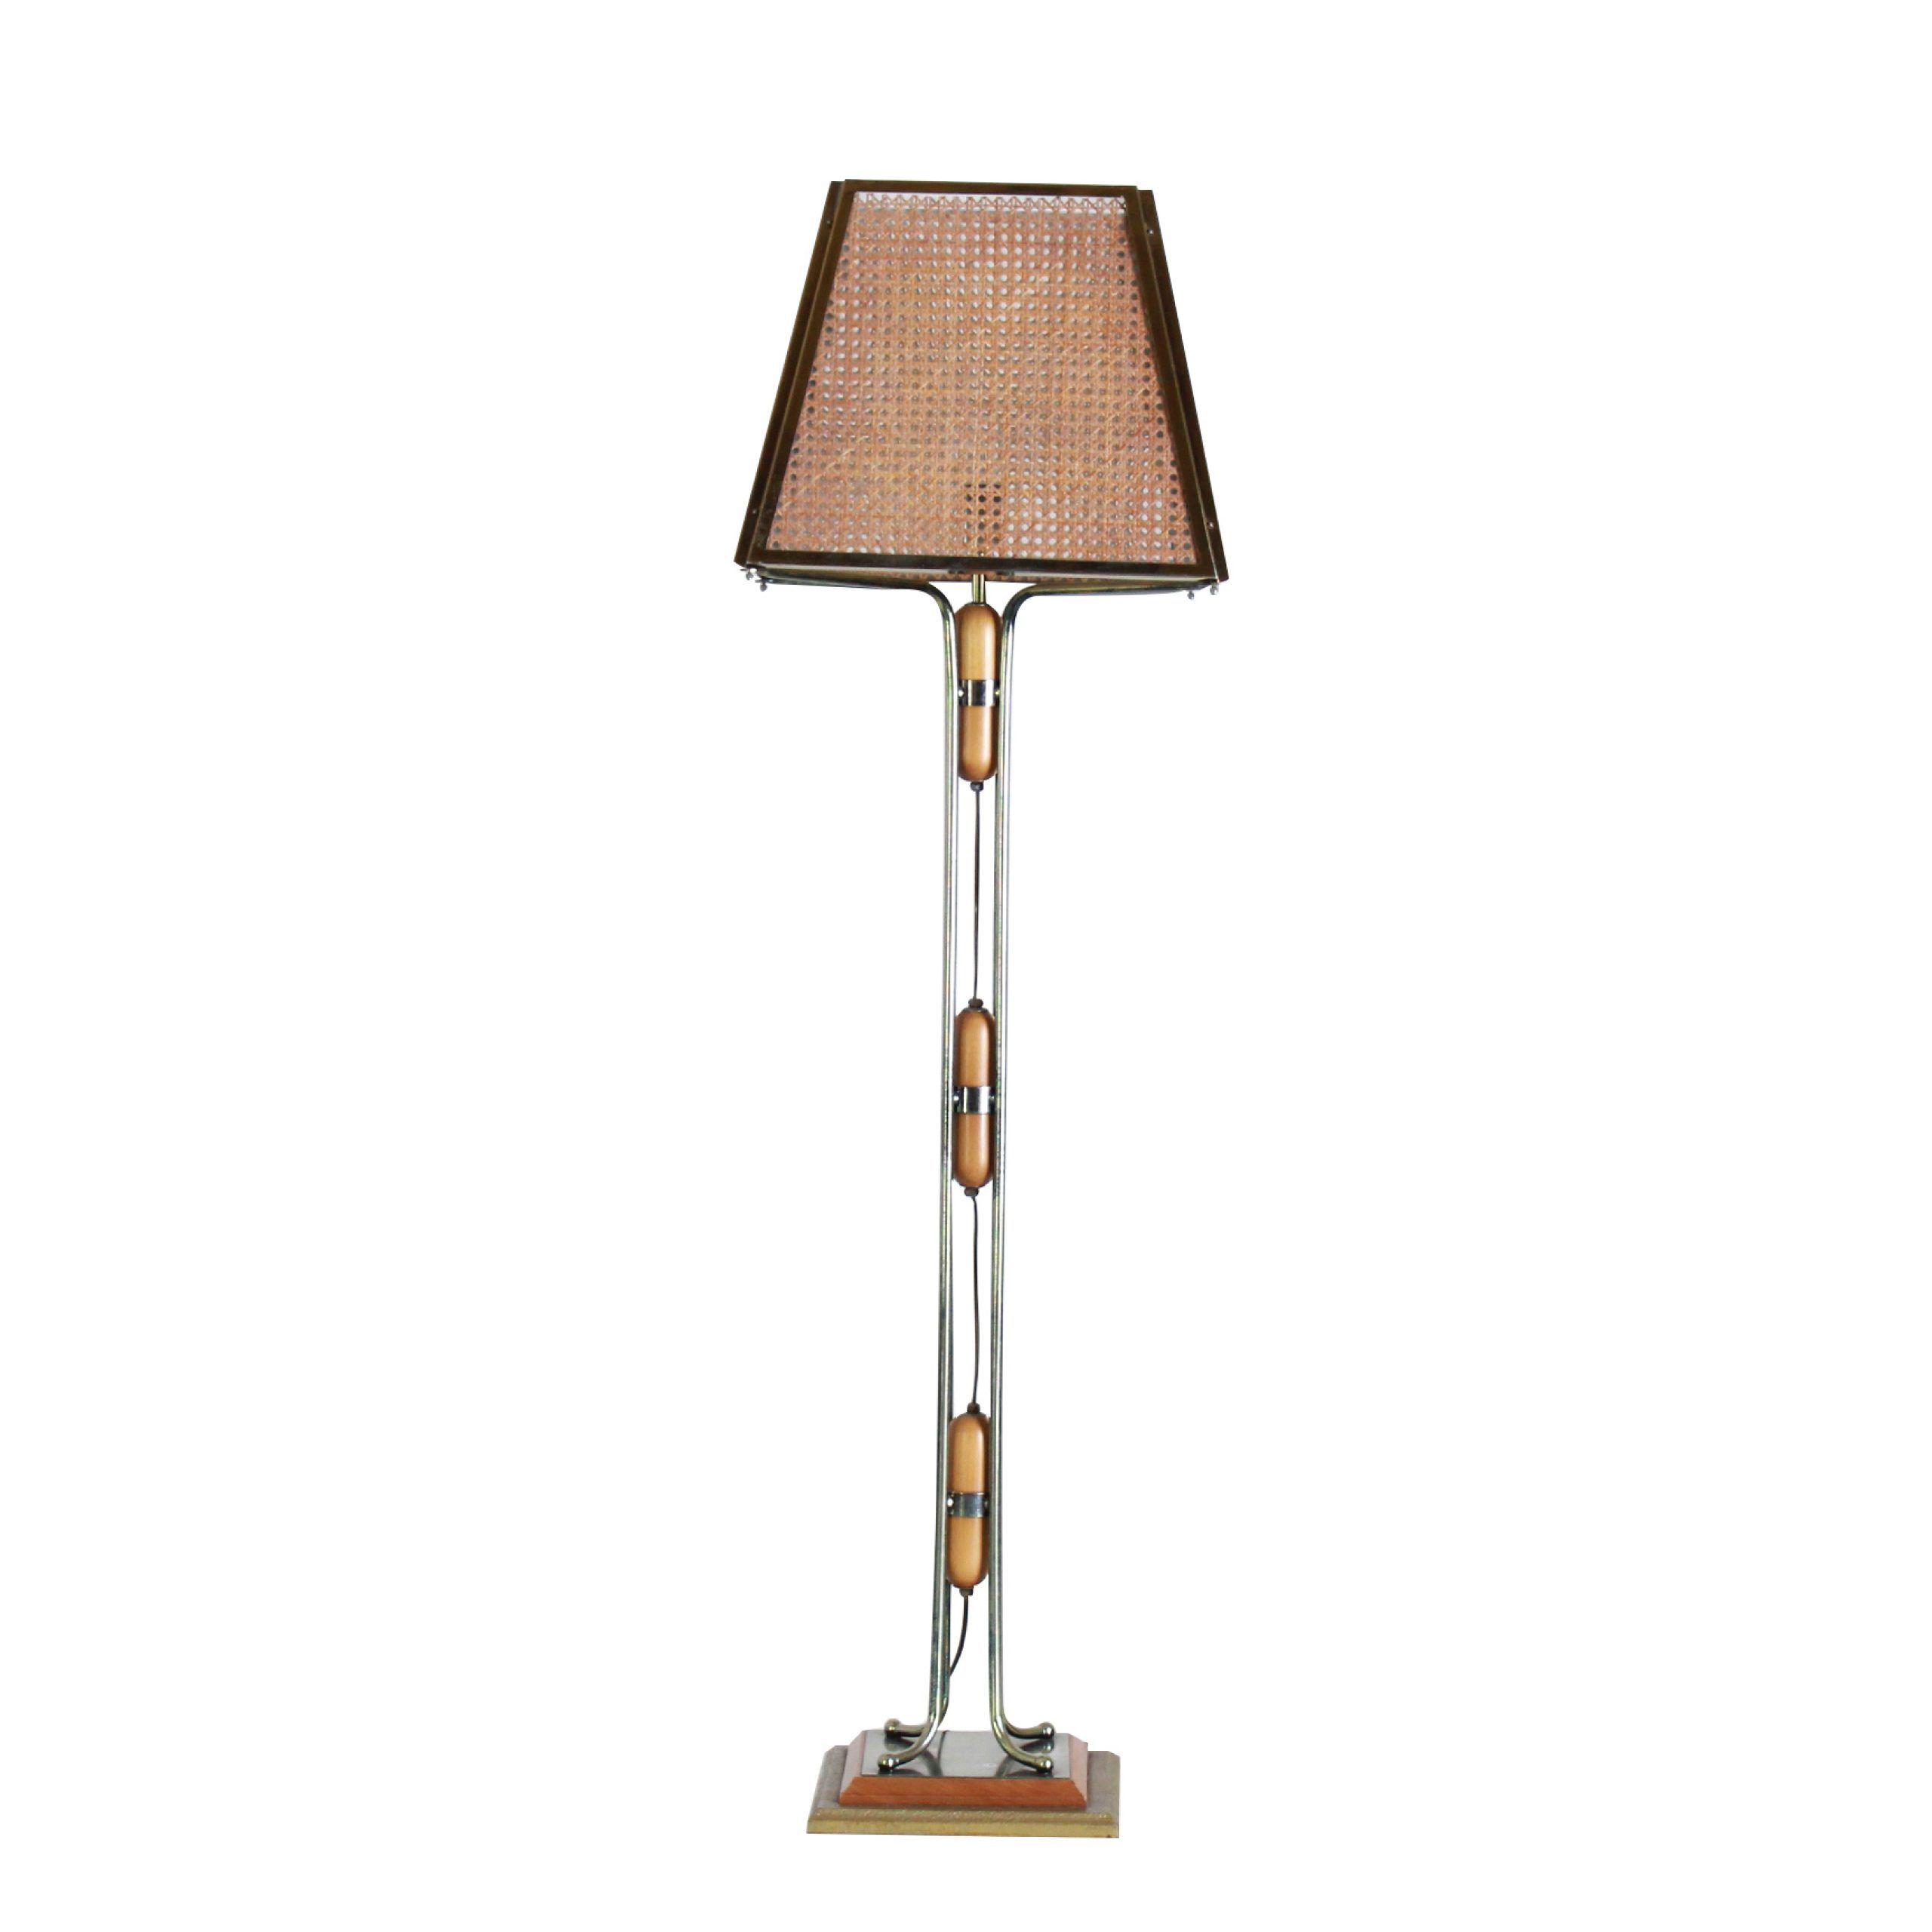 Trendy Floor Lamp In Brass Plated Steel, Beech And Vienna Straw, 70s (View 15 of 15)